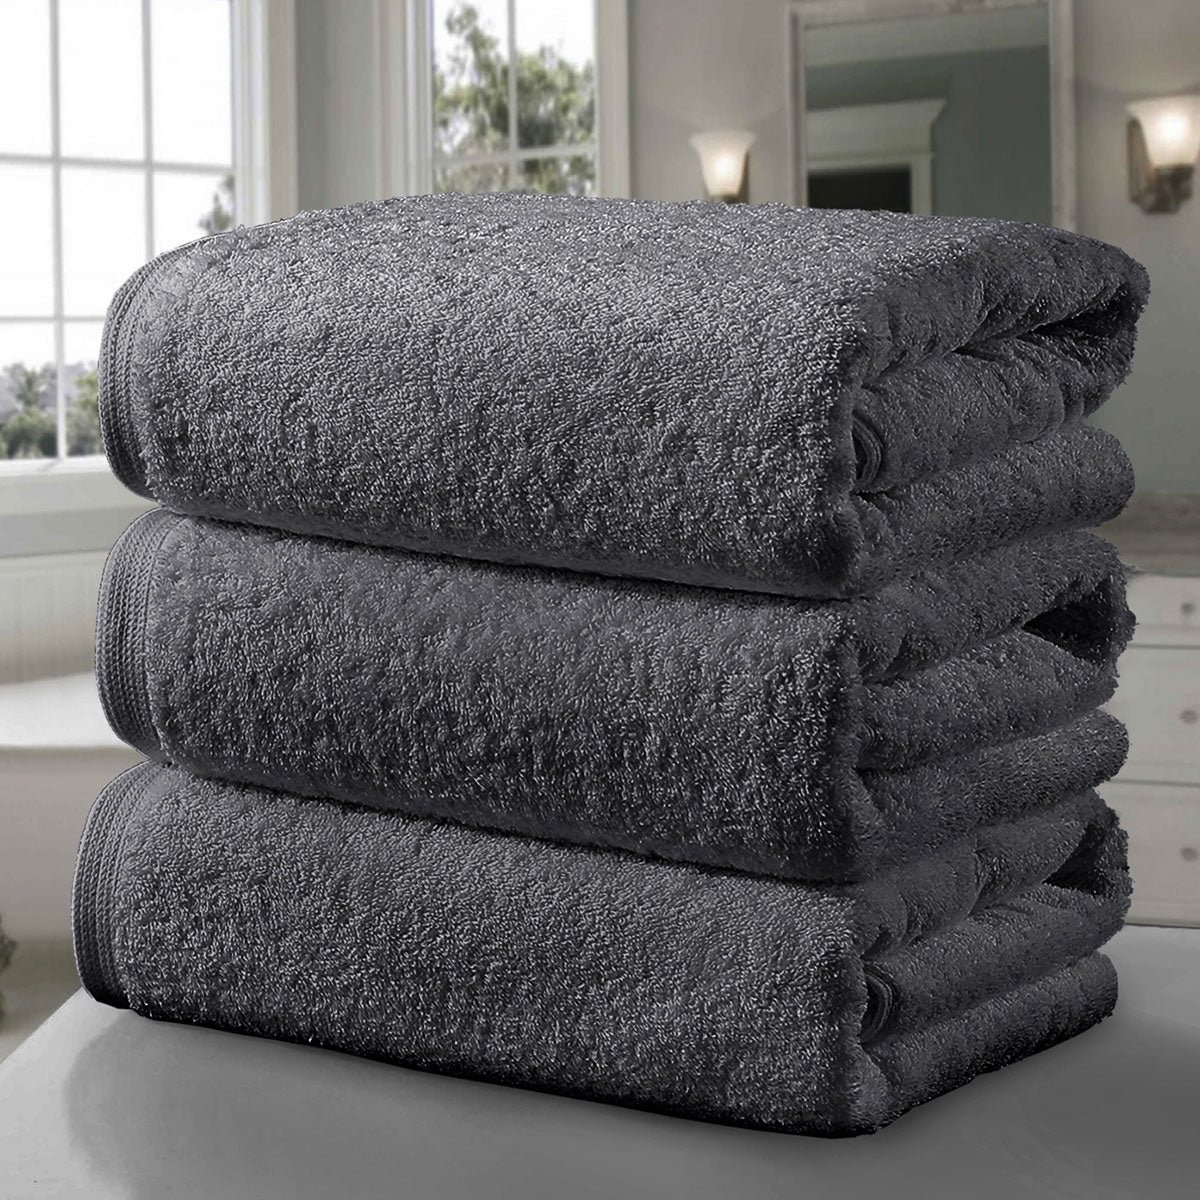 Super Luxury Spa Towel - Extraordinarily Large & Fluffy